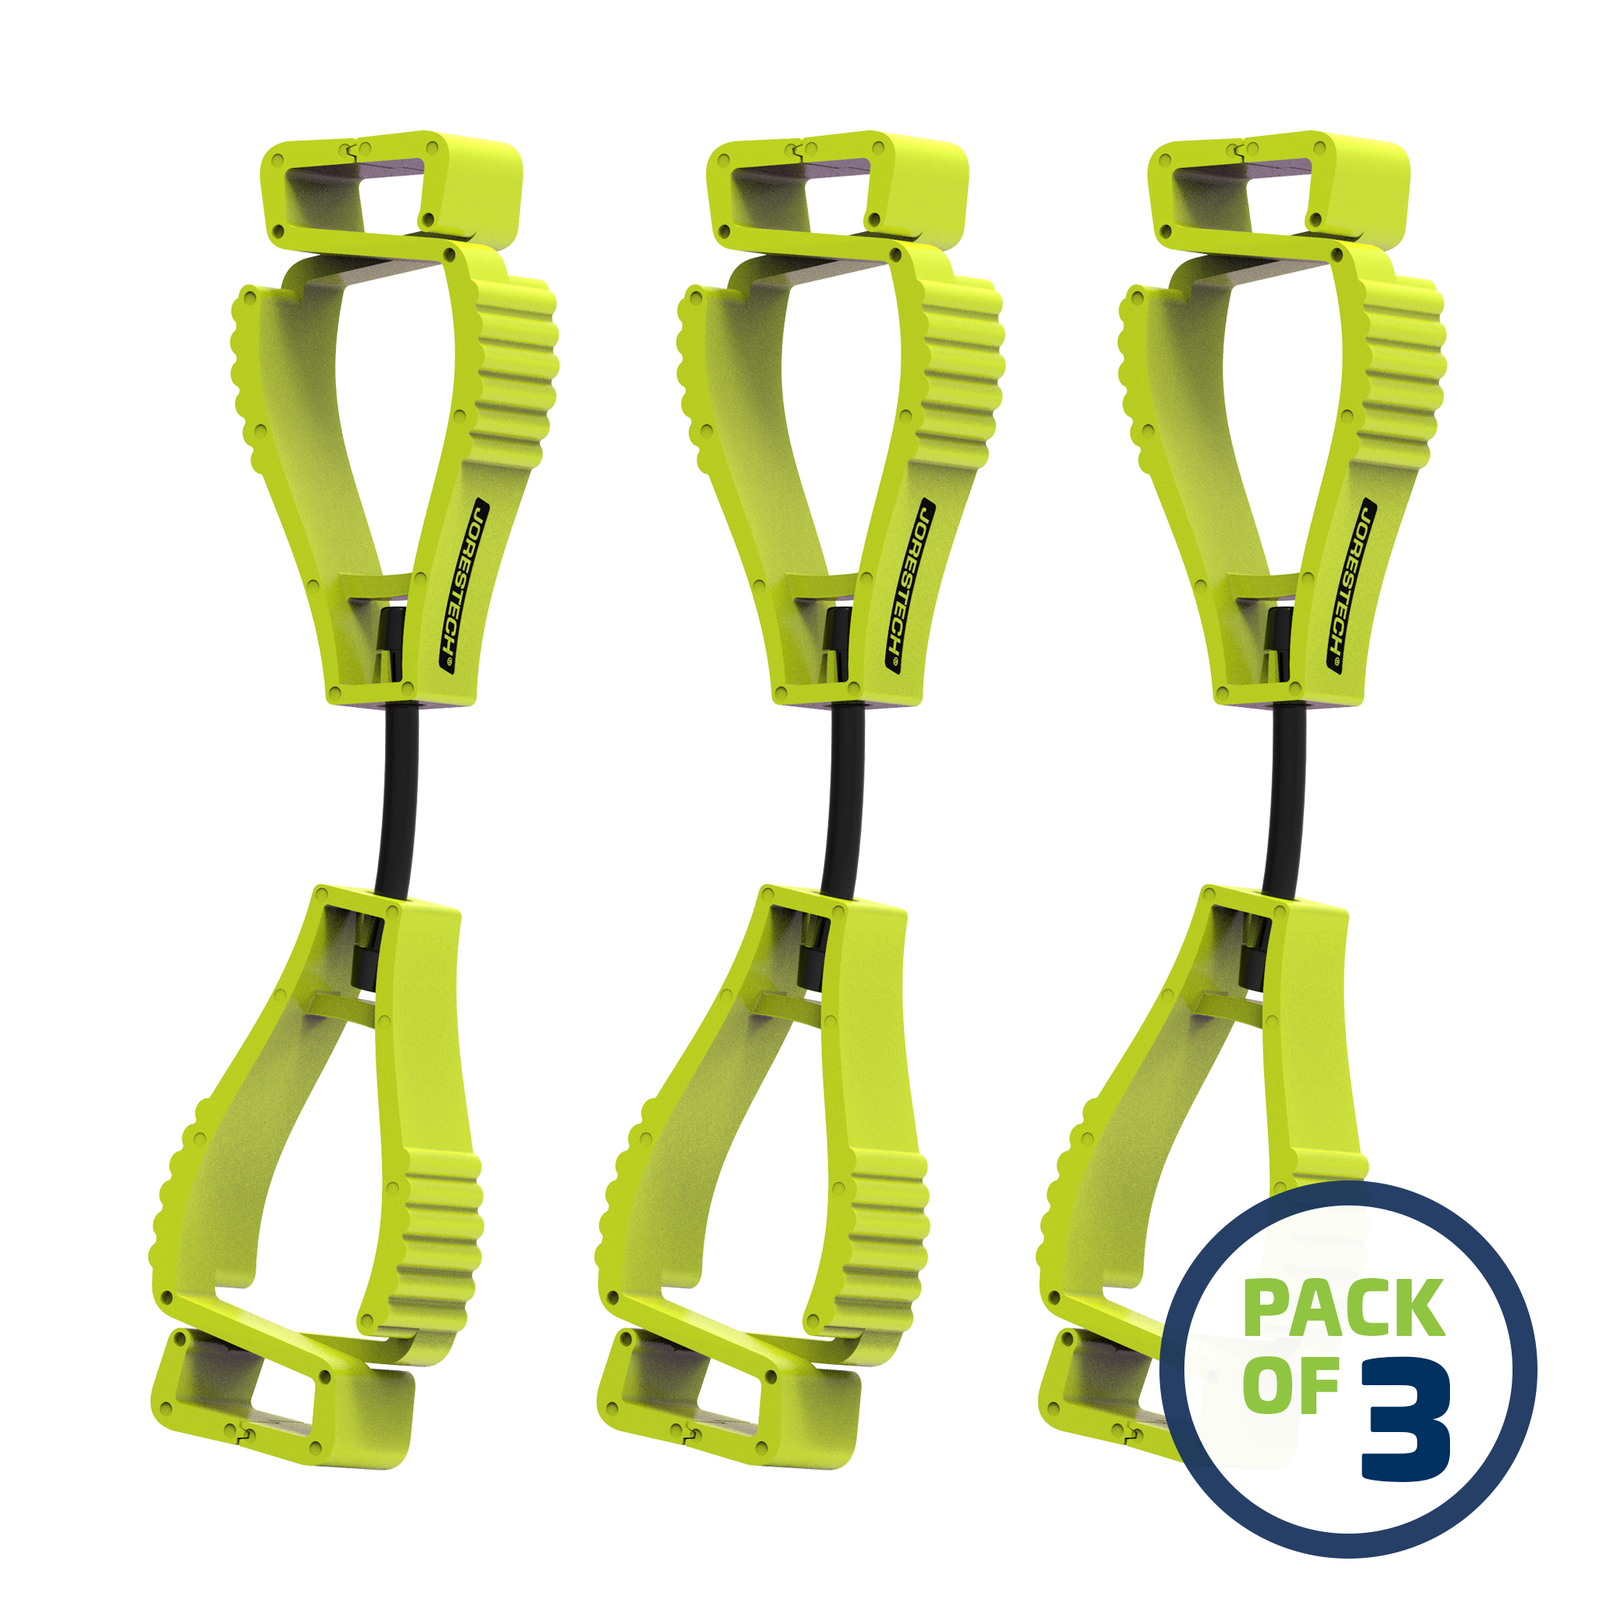 3 Lime glove clip safety holders 